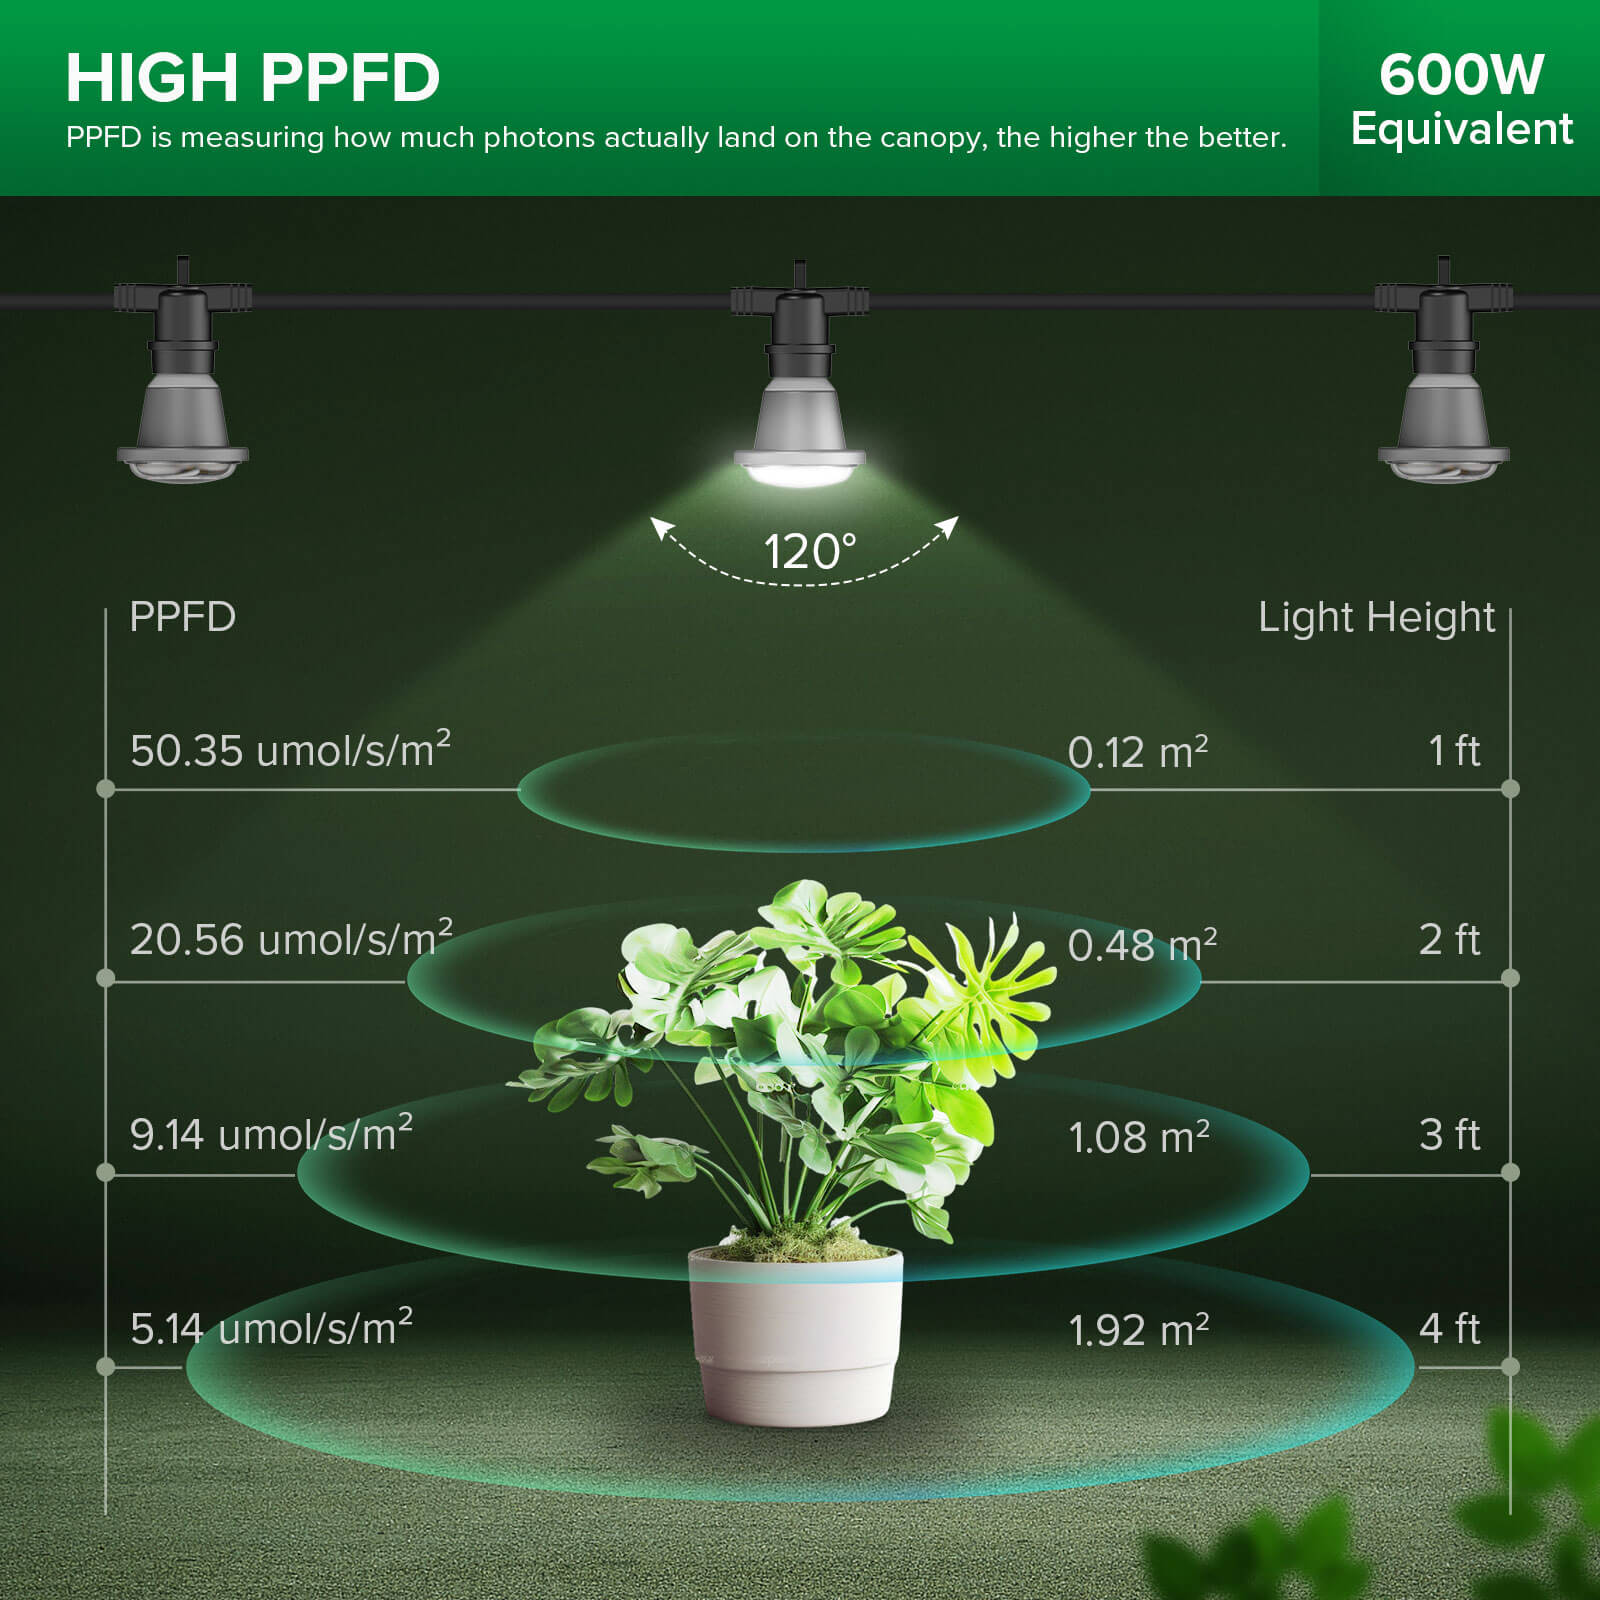 Hanging Grow Light String with high PPFD, 50.35 umol/s/m2 at 1ft.